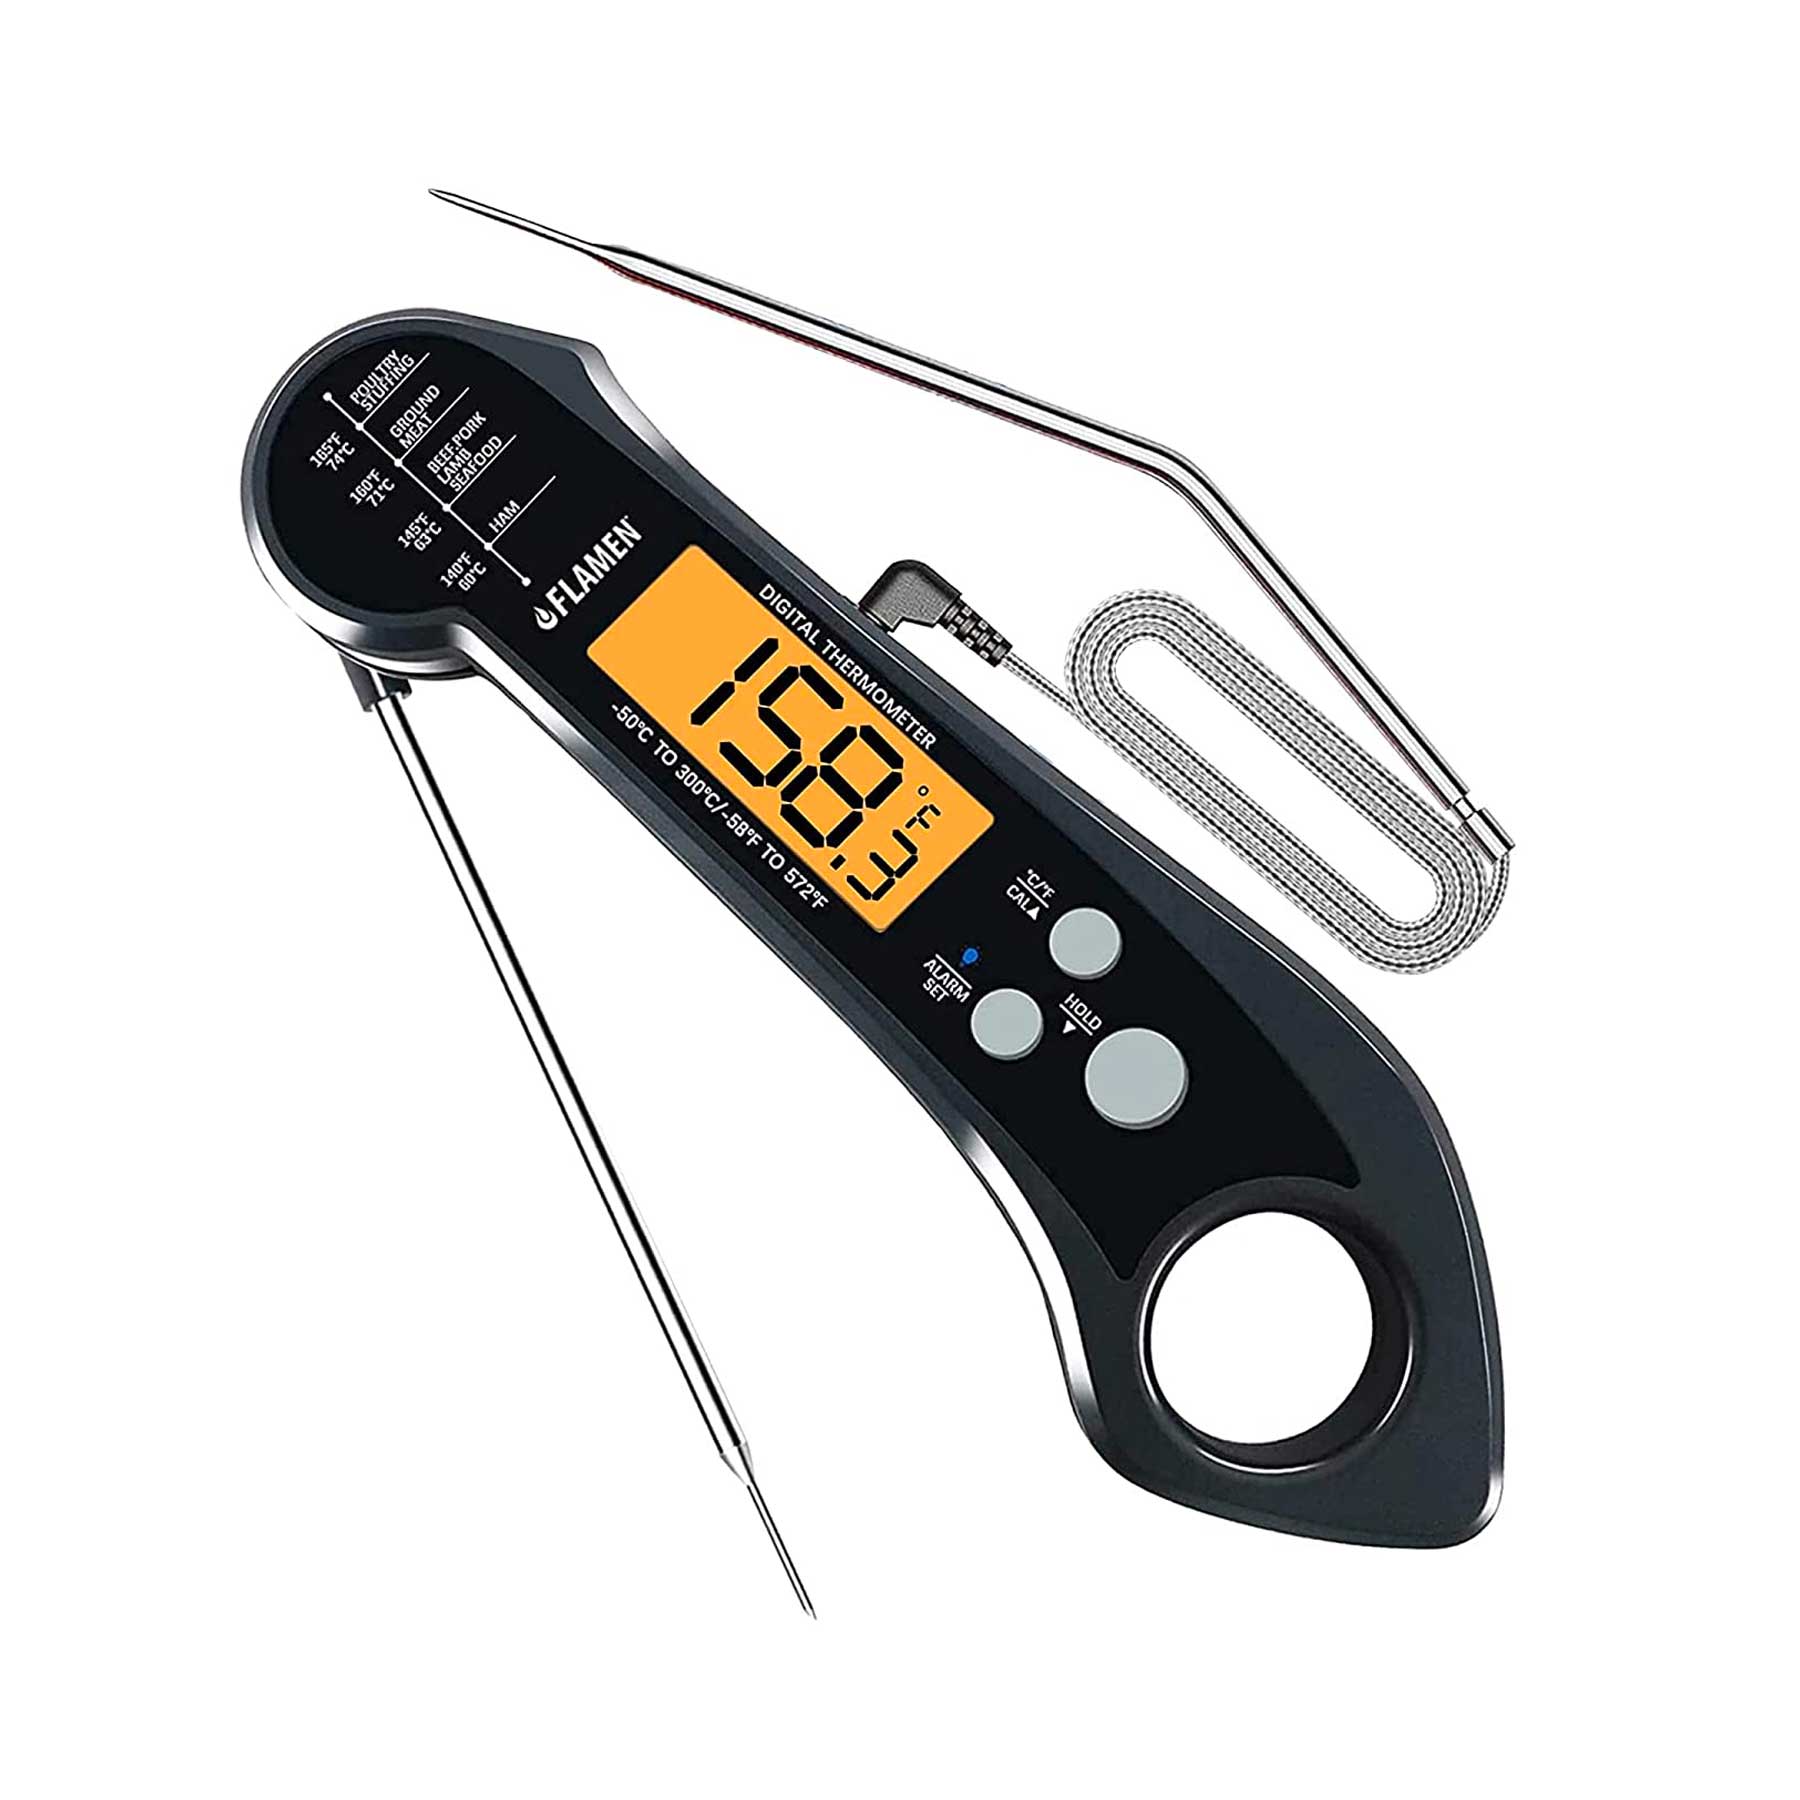 Flamen Digital Meat Thermometer, 2 in 1 Dual Probe Food Thermometer with Backlight, Temperature Alarm, Waterproof Instant Read Meat Thermometer for Kitchen, Deep Frying, Baking, Turkey, BBQ